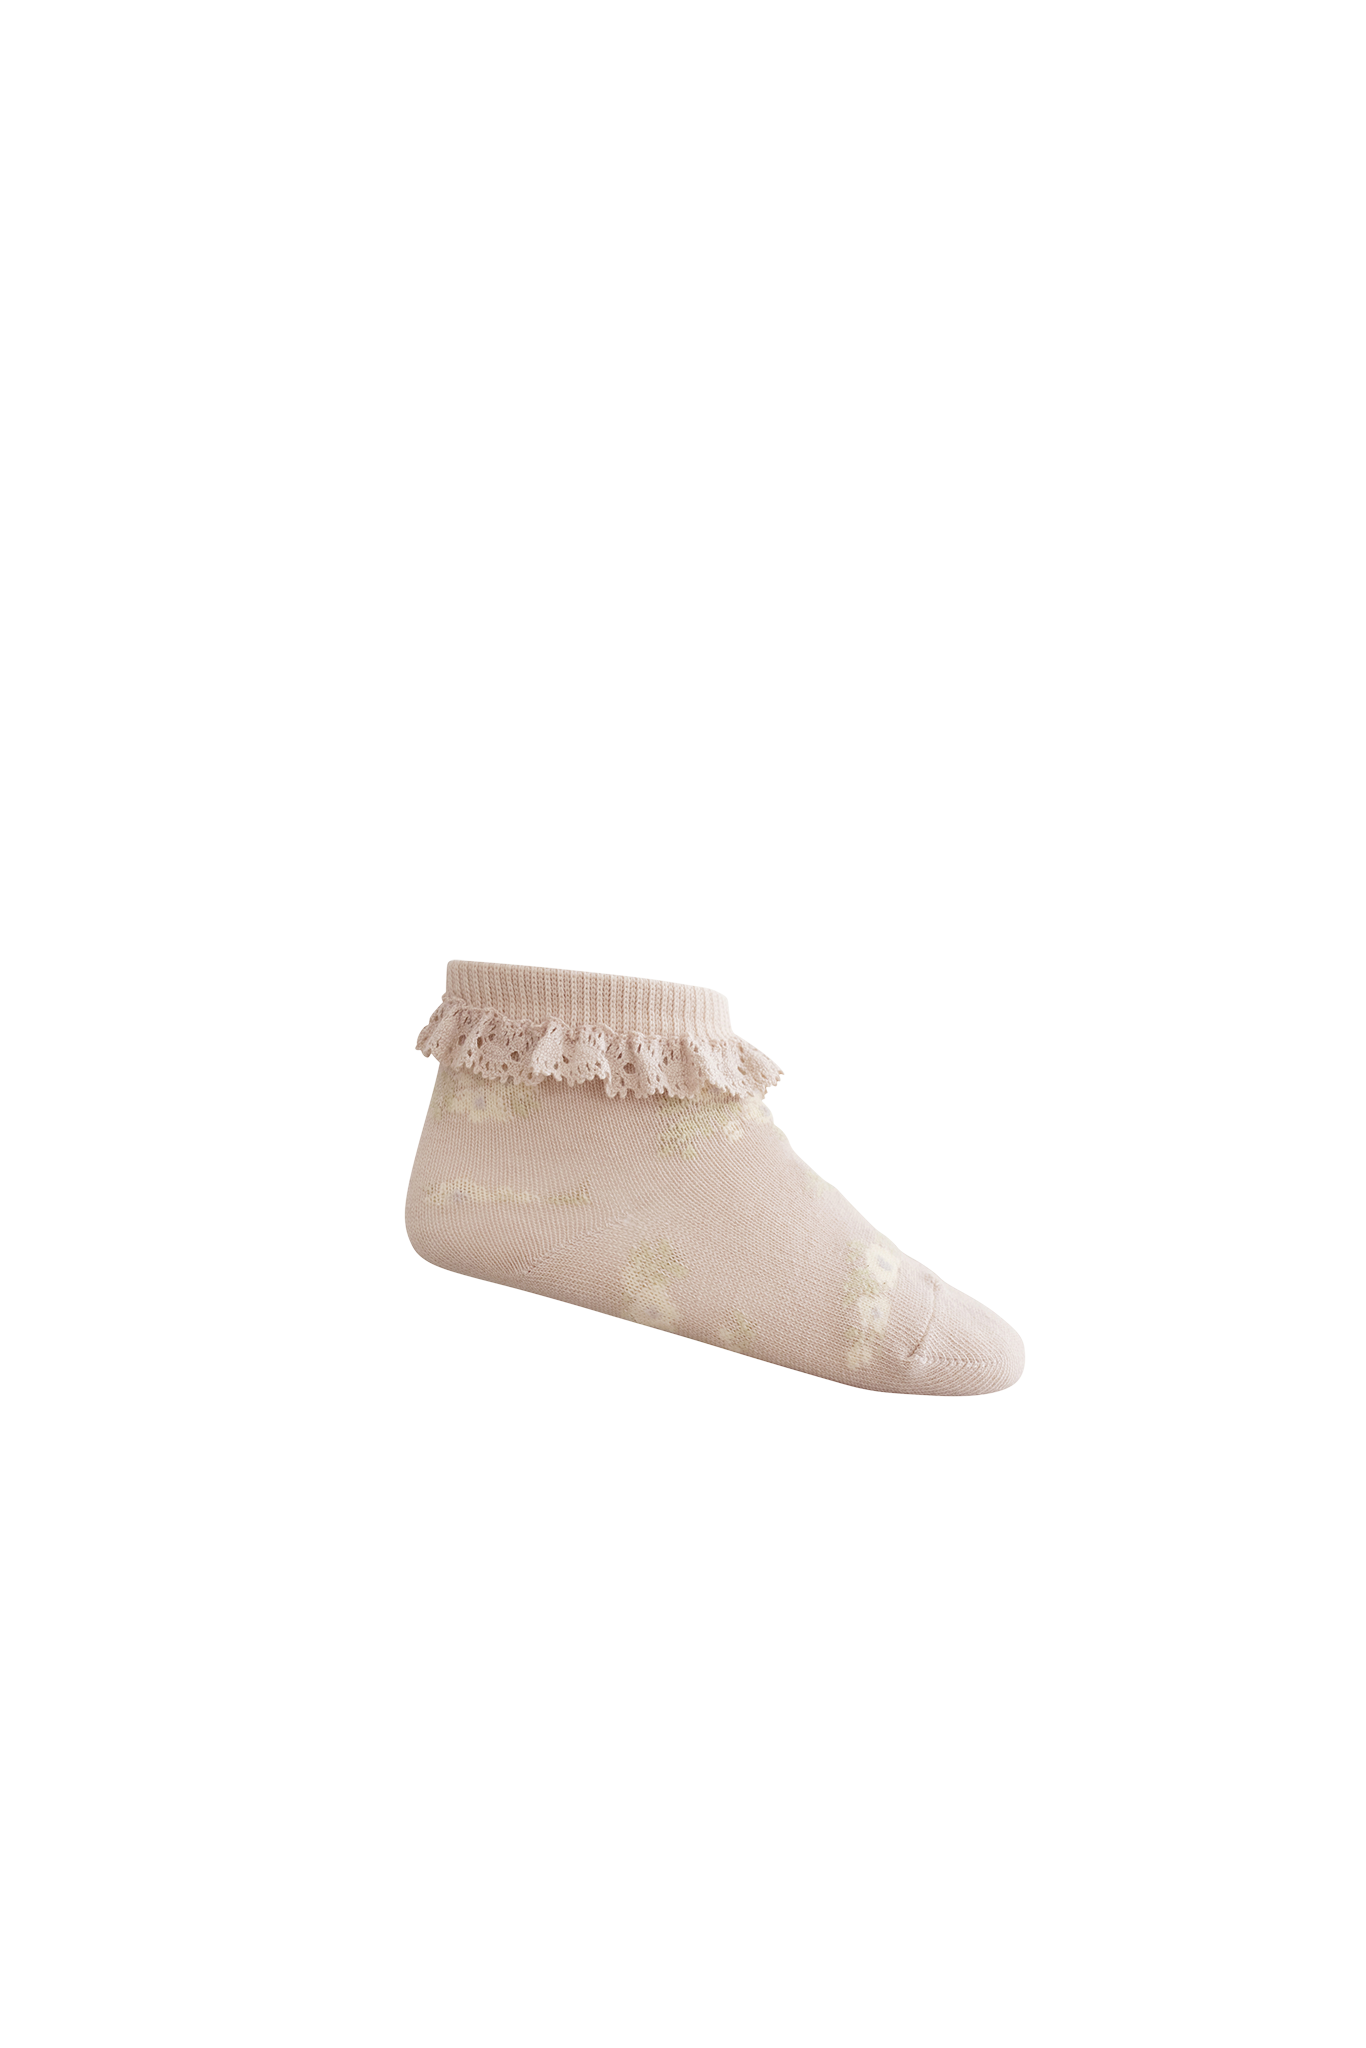 Load image into Gallery viewer, Frill Ankle Sock - Petite Fleur Pillow
